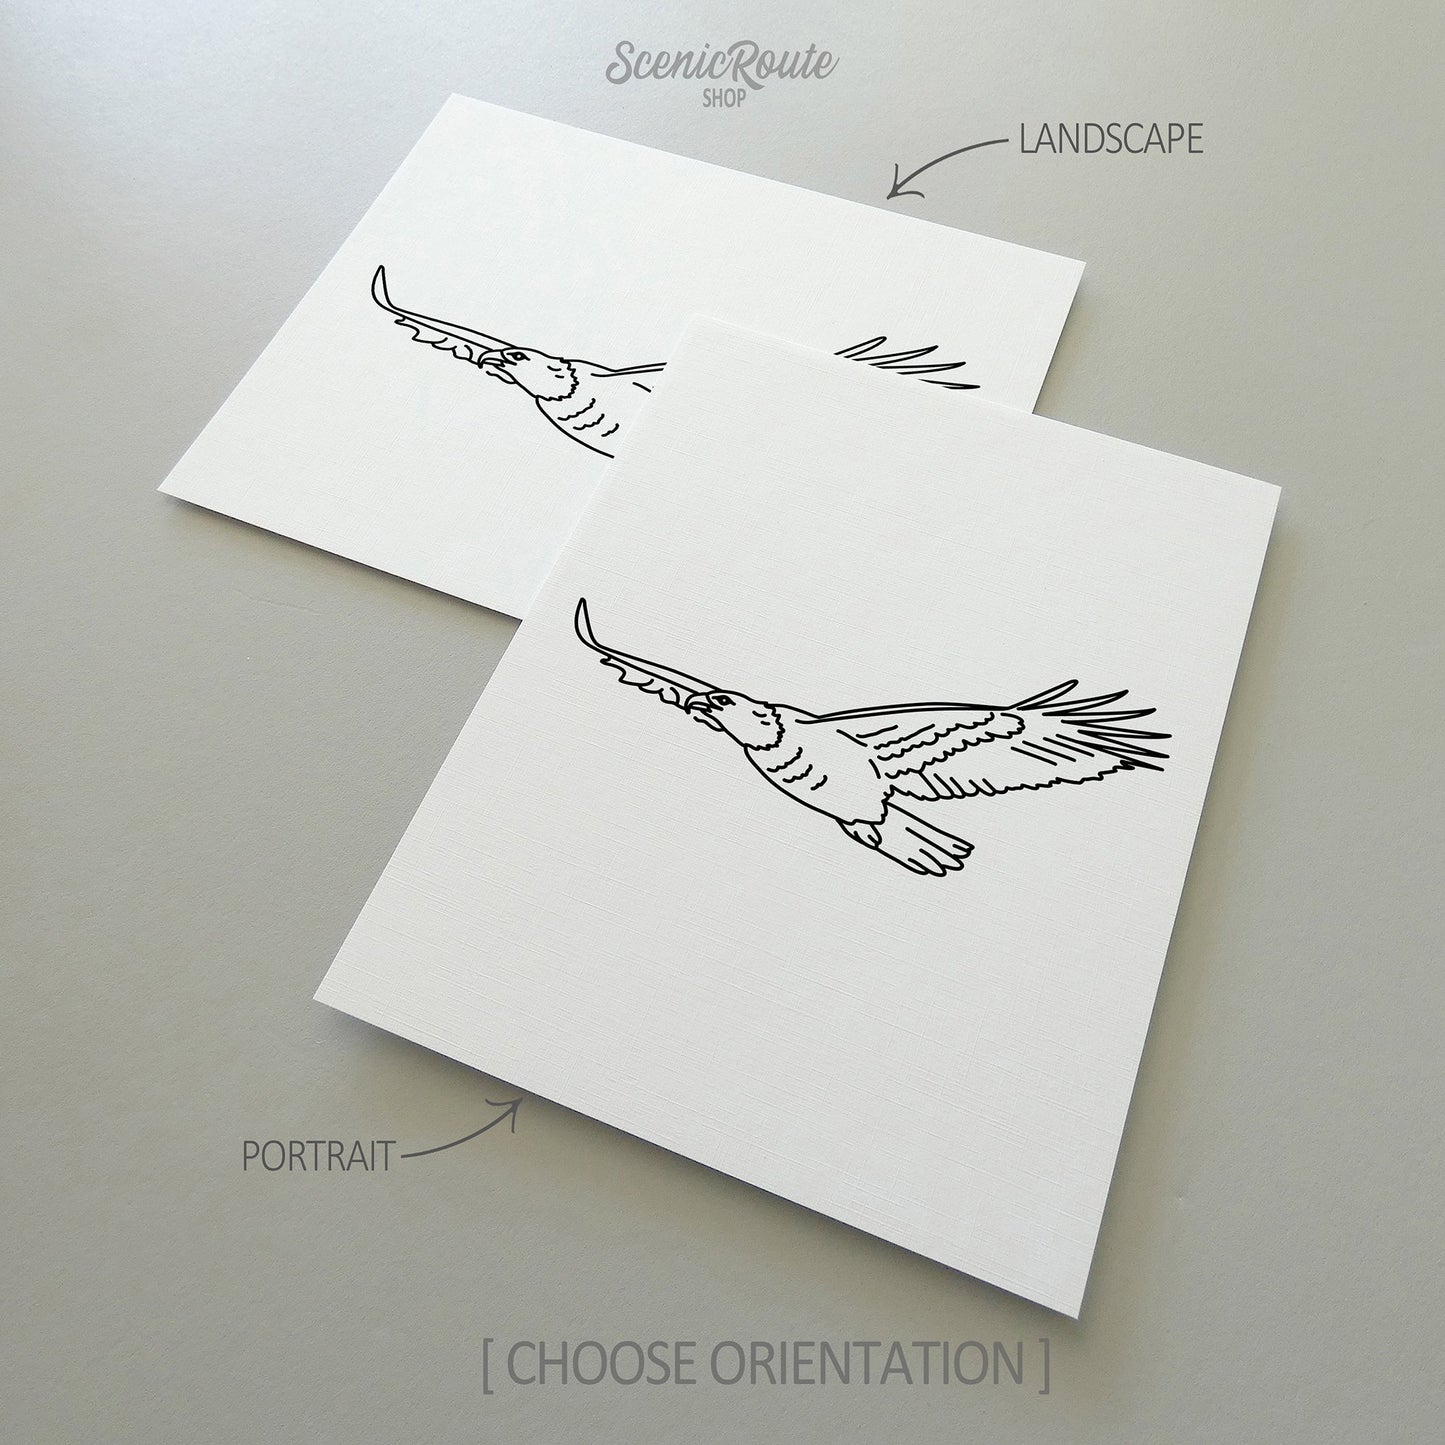 Two line art drawings of an Eagle on white linen paper with a gray background.  The pieces are shown in portrait and landscape orientation for the available art print options.